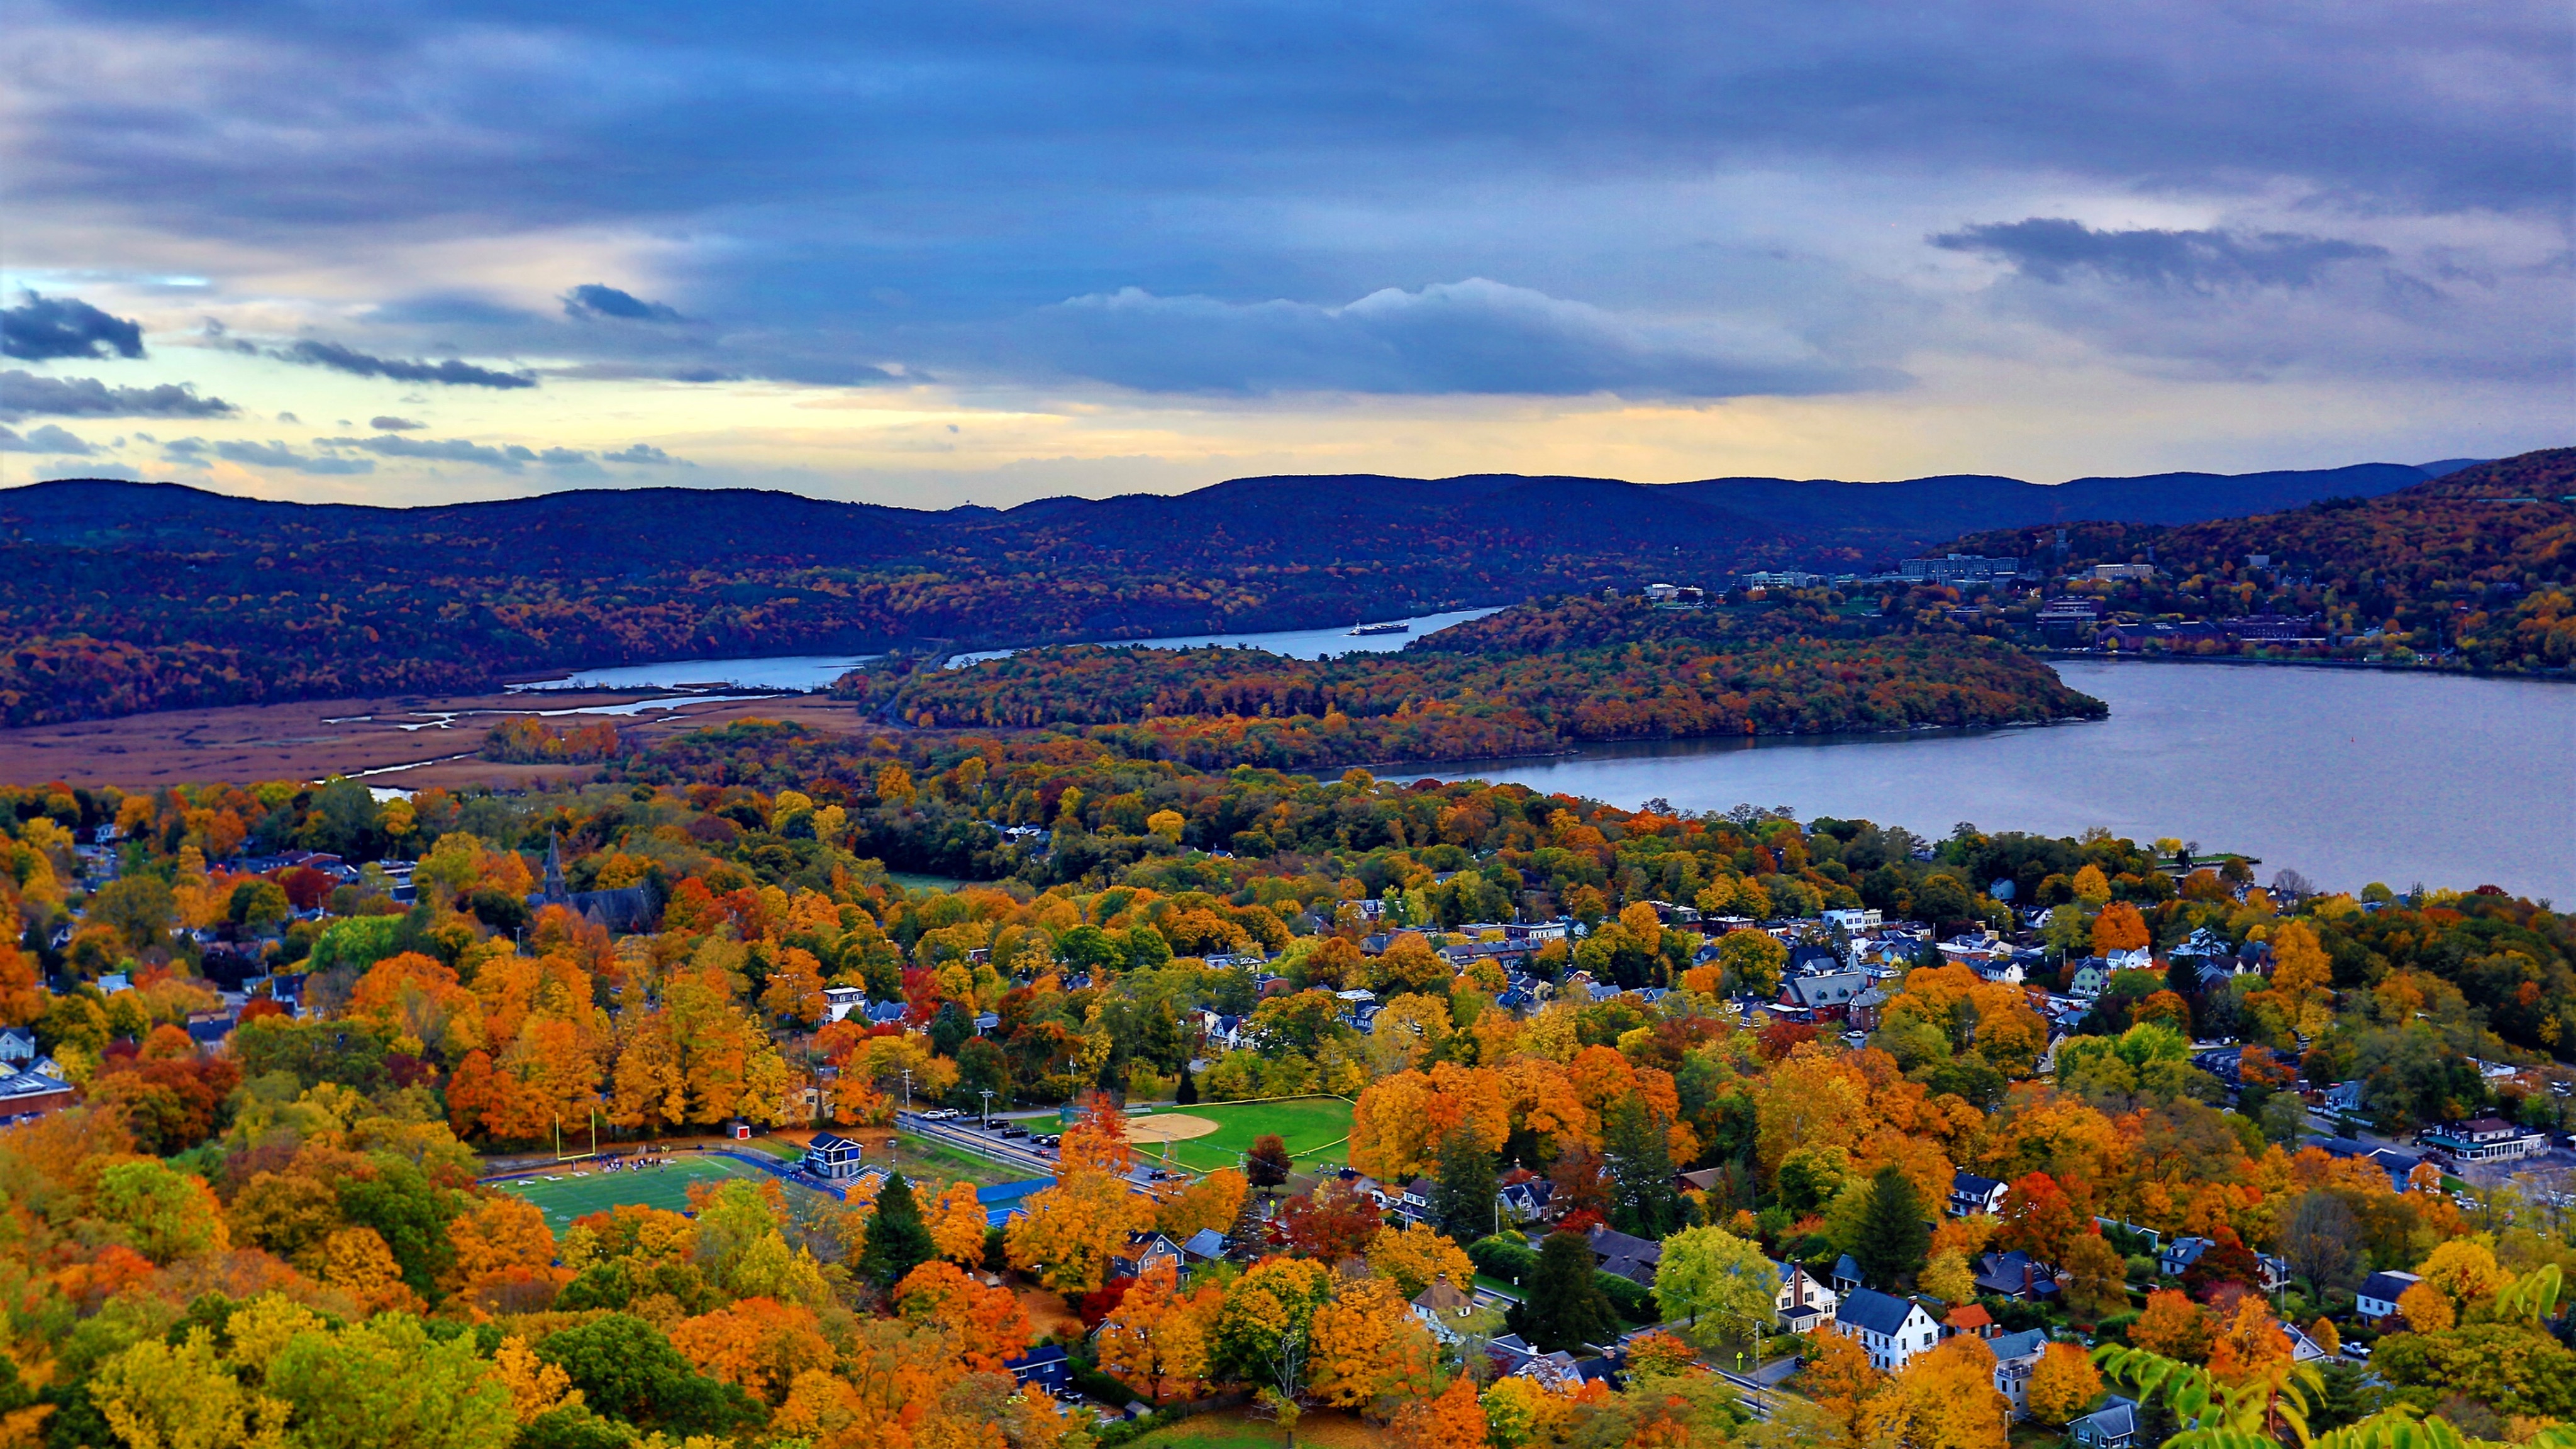 Community photo by Paul C. Peh | Cold Spring, New York, USA